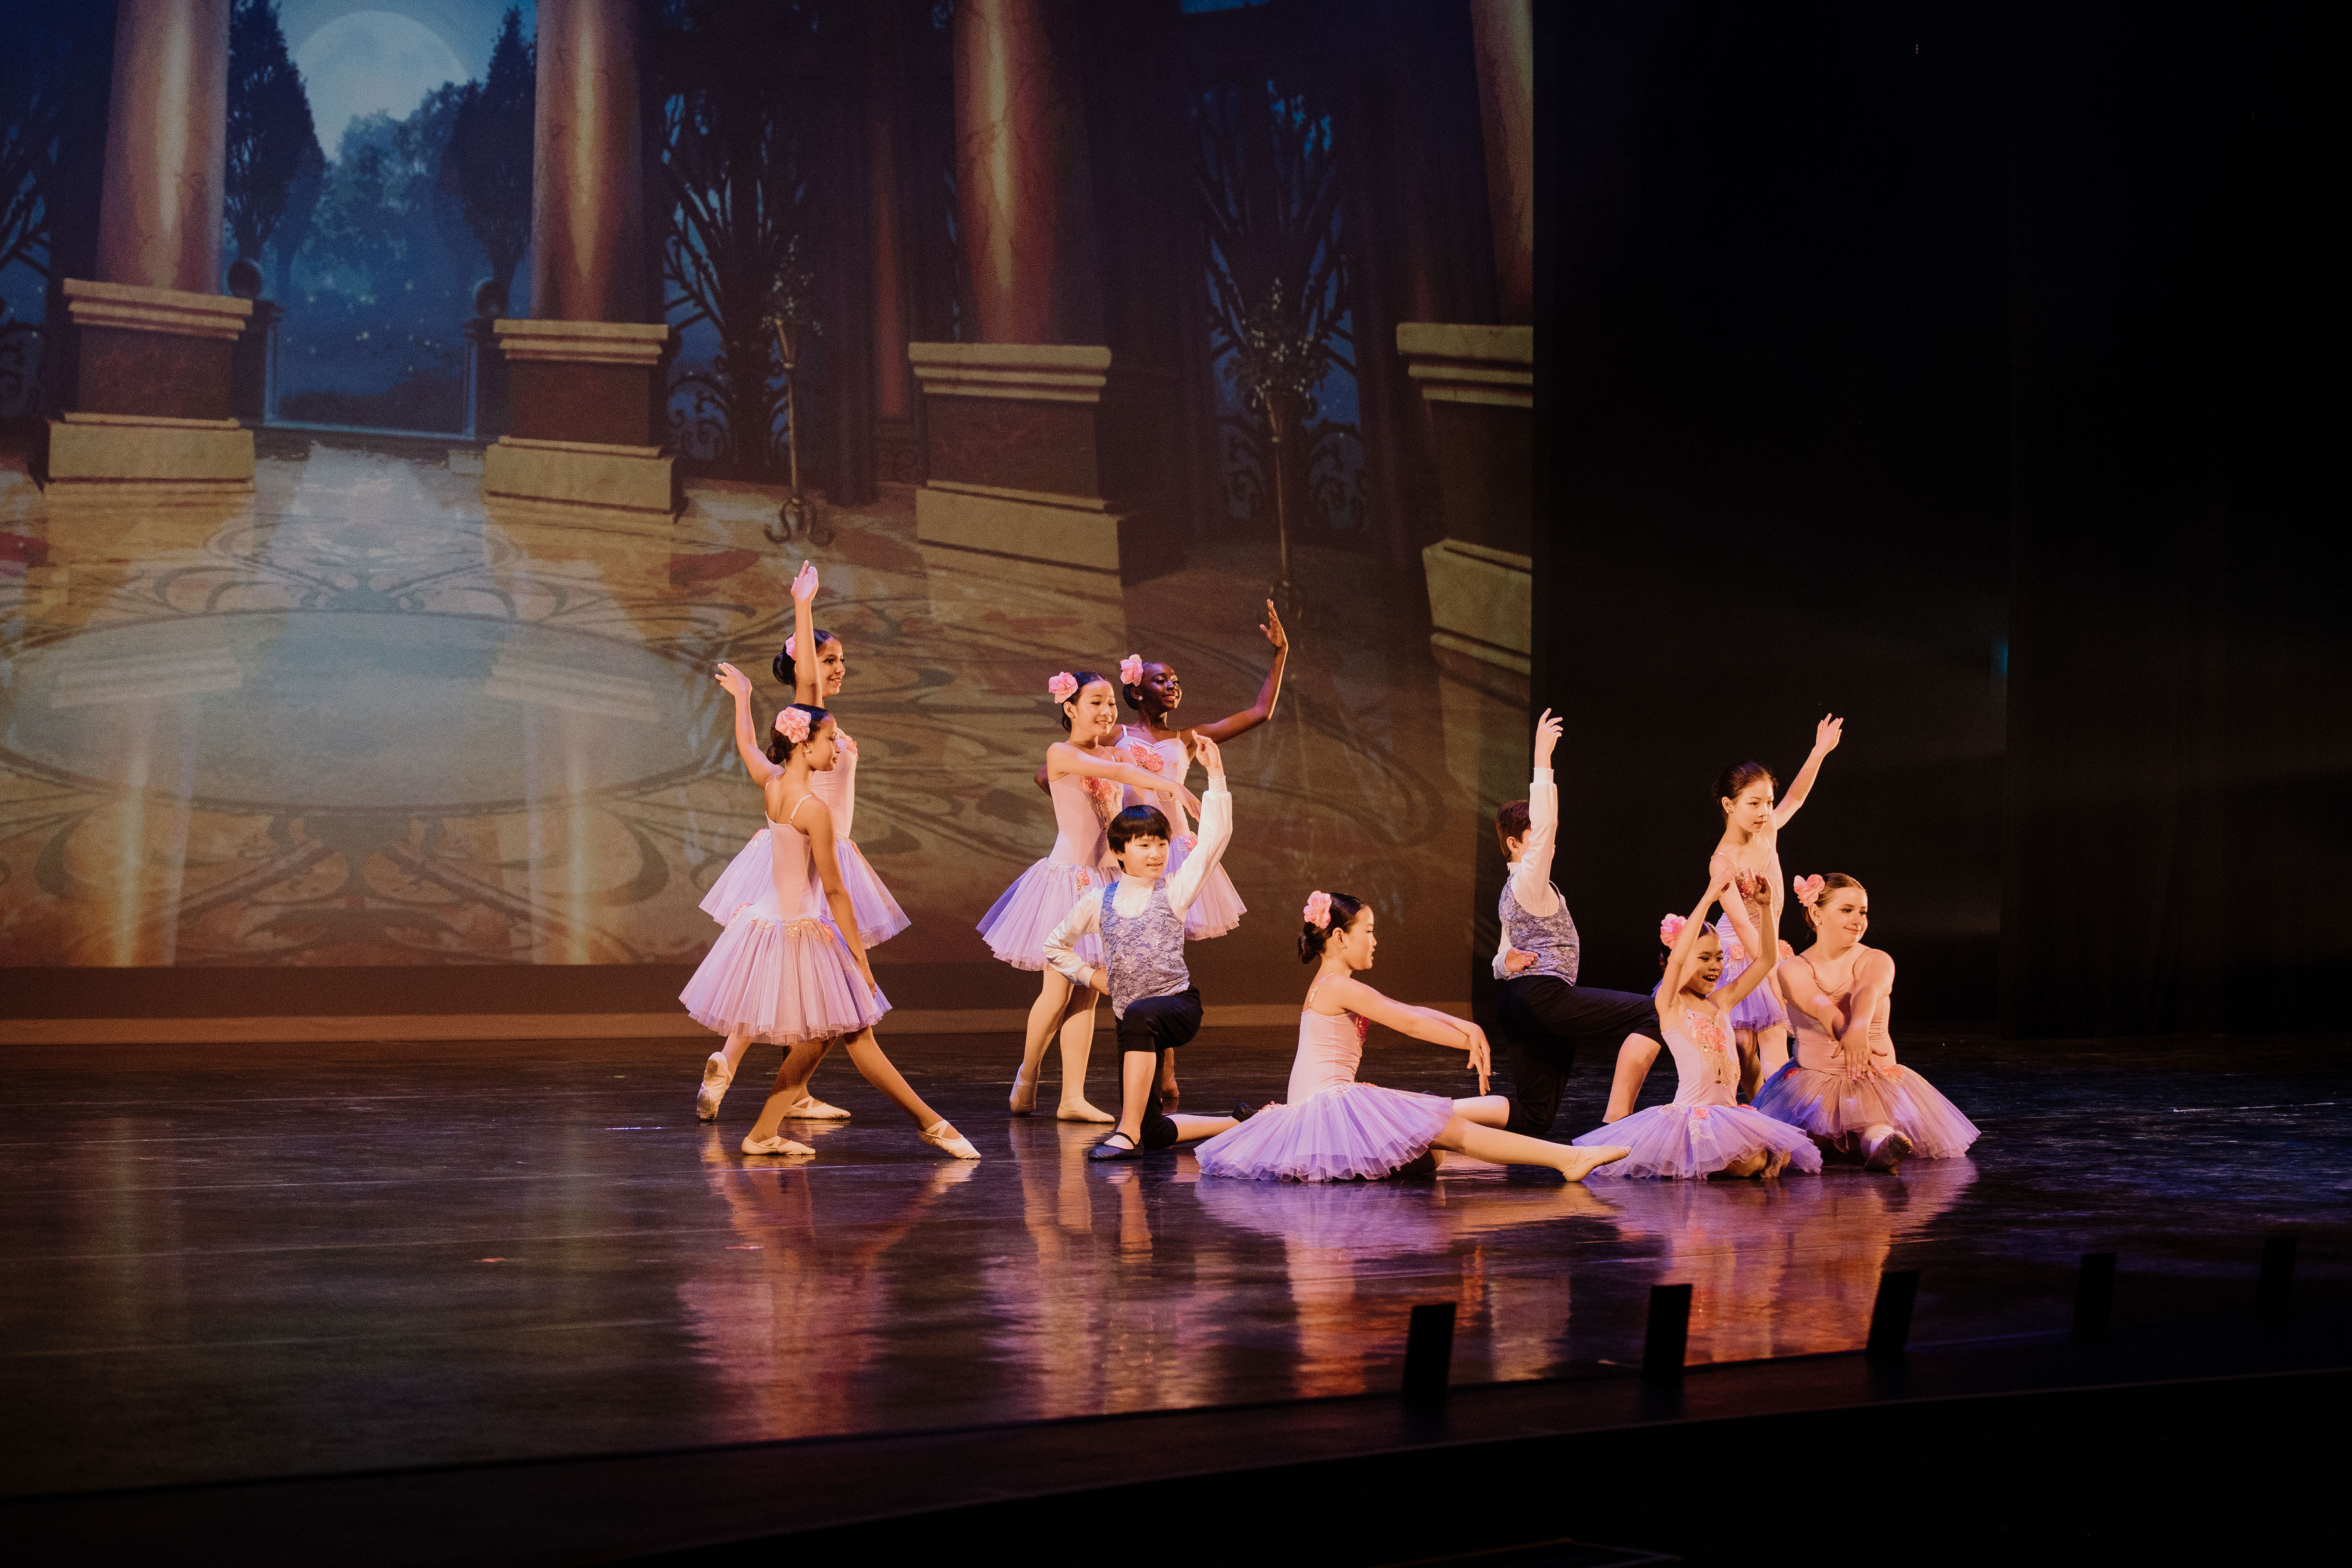 Large ballet group dancing on stage